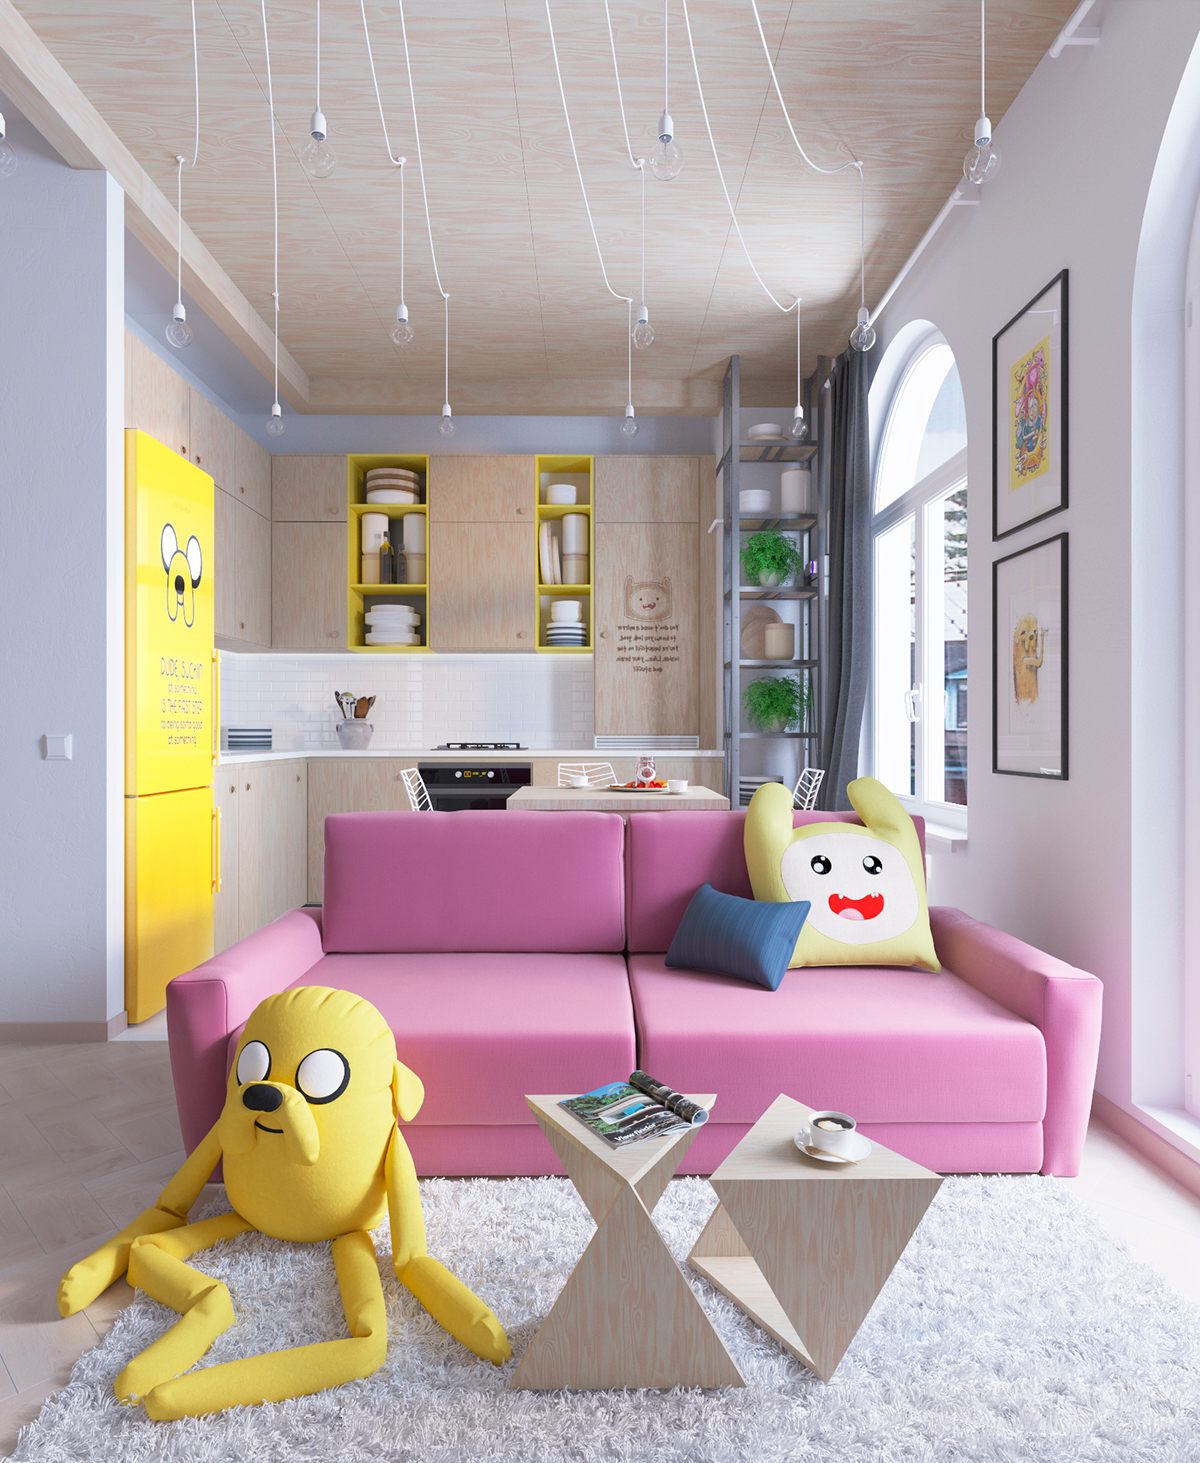 Beautiful living room by Finn and Jake "width =" 1200 "height =" 1463 "srcset =" https://mileray.com/wp-content/uploads/2020/05/1588509825_12_4-Beautiful-Home-Designs-Ideas-Get-Some-Awesome-Living-Room.jpg 1200w, https : //mileray.com/wp-content/uploads/2016/08/finn-and-jake-livingroom-246x300.jpg 246w, https://mileray.com/wp-content/uploads/2016/08/finn- and -jake-livingroom-768x936.jpg 768w, https://mileray.com/wp-content/uploads/2016/08/finn-and-jake-livingroom-840x1024.jpg 840w, https://mileray.com/ wp -content / uploads / 2016/08 / finn-and-jake-livingroom-696x849.jpg 696w, https://mileray.com/wp-content/uploads/2016/08/finn-and-jake-livingroom-1068x1302 . jpg 1068w, https://mileray.com/wp-content/uploads/2016/08/finn-and-jake-livingroom-344x420.jpg 344w "sizes =" (maximum width: 1200px) 100vw, 1200px